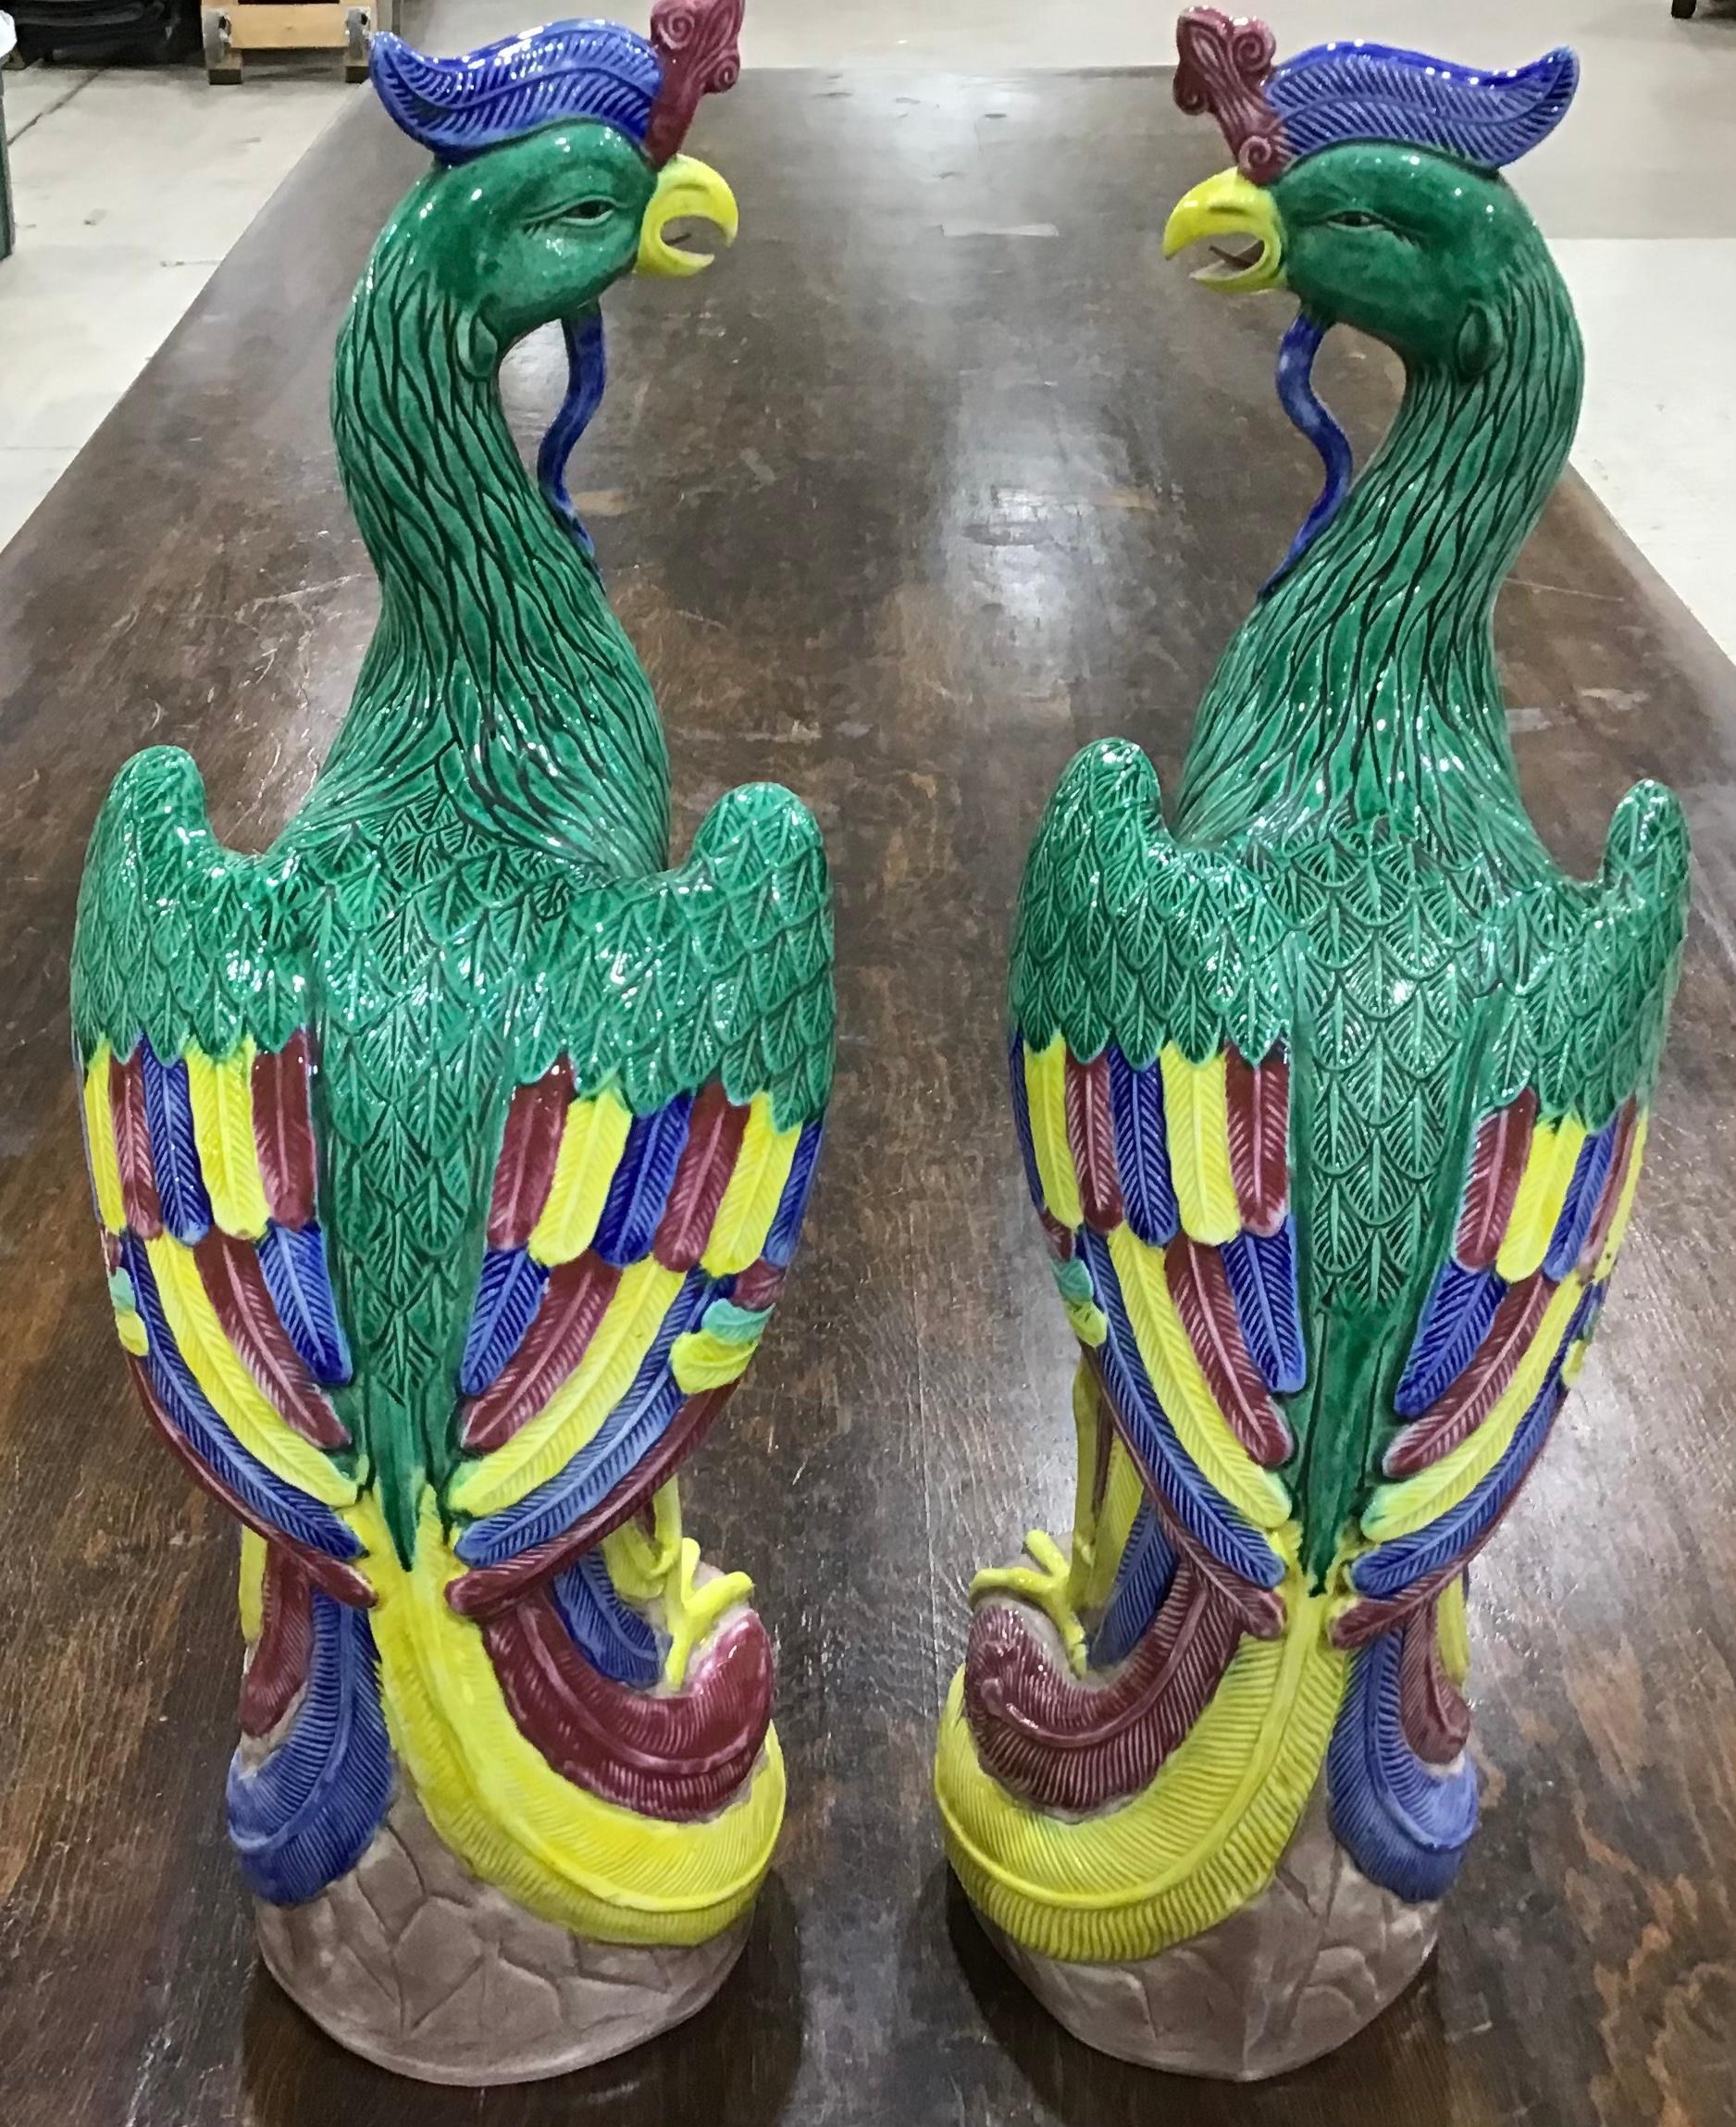 Large Pair of Chinese Export Porcelain Roosters 1